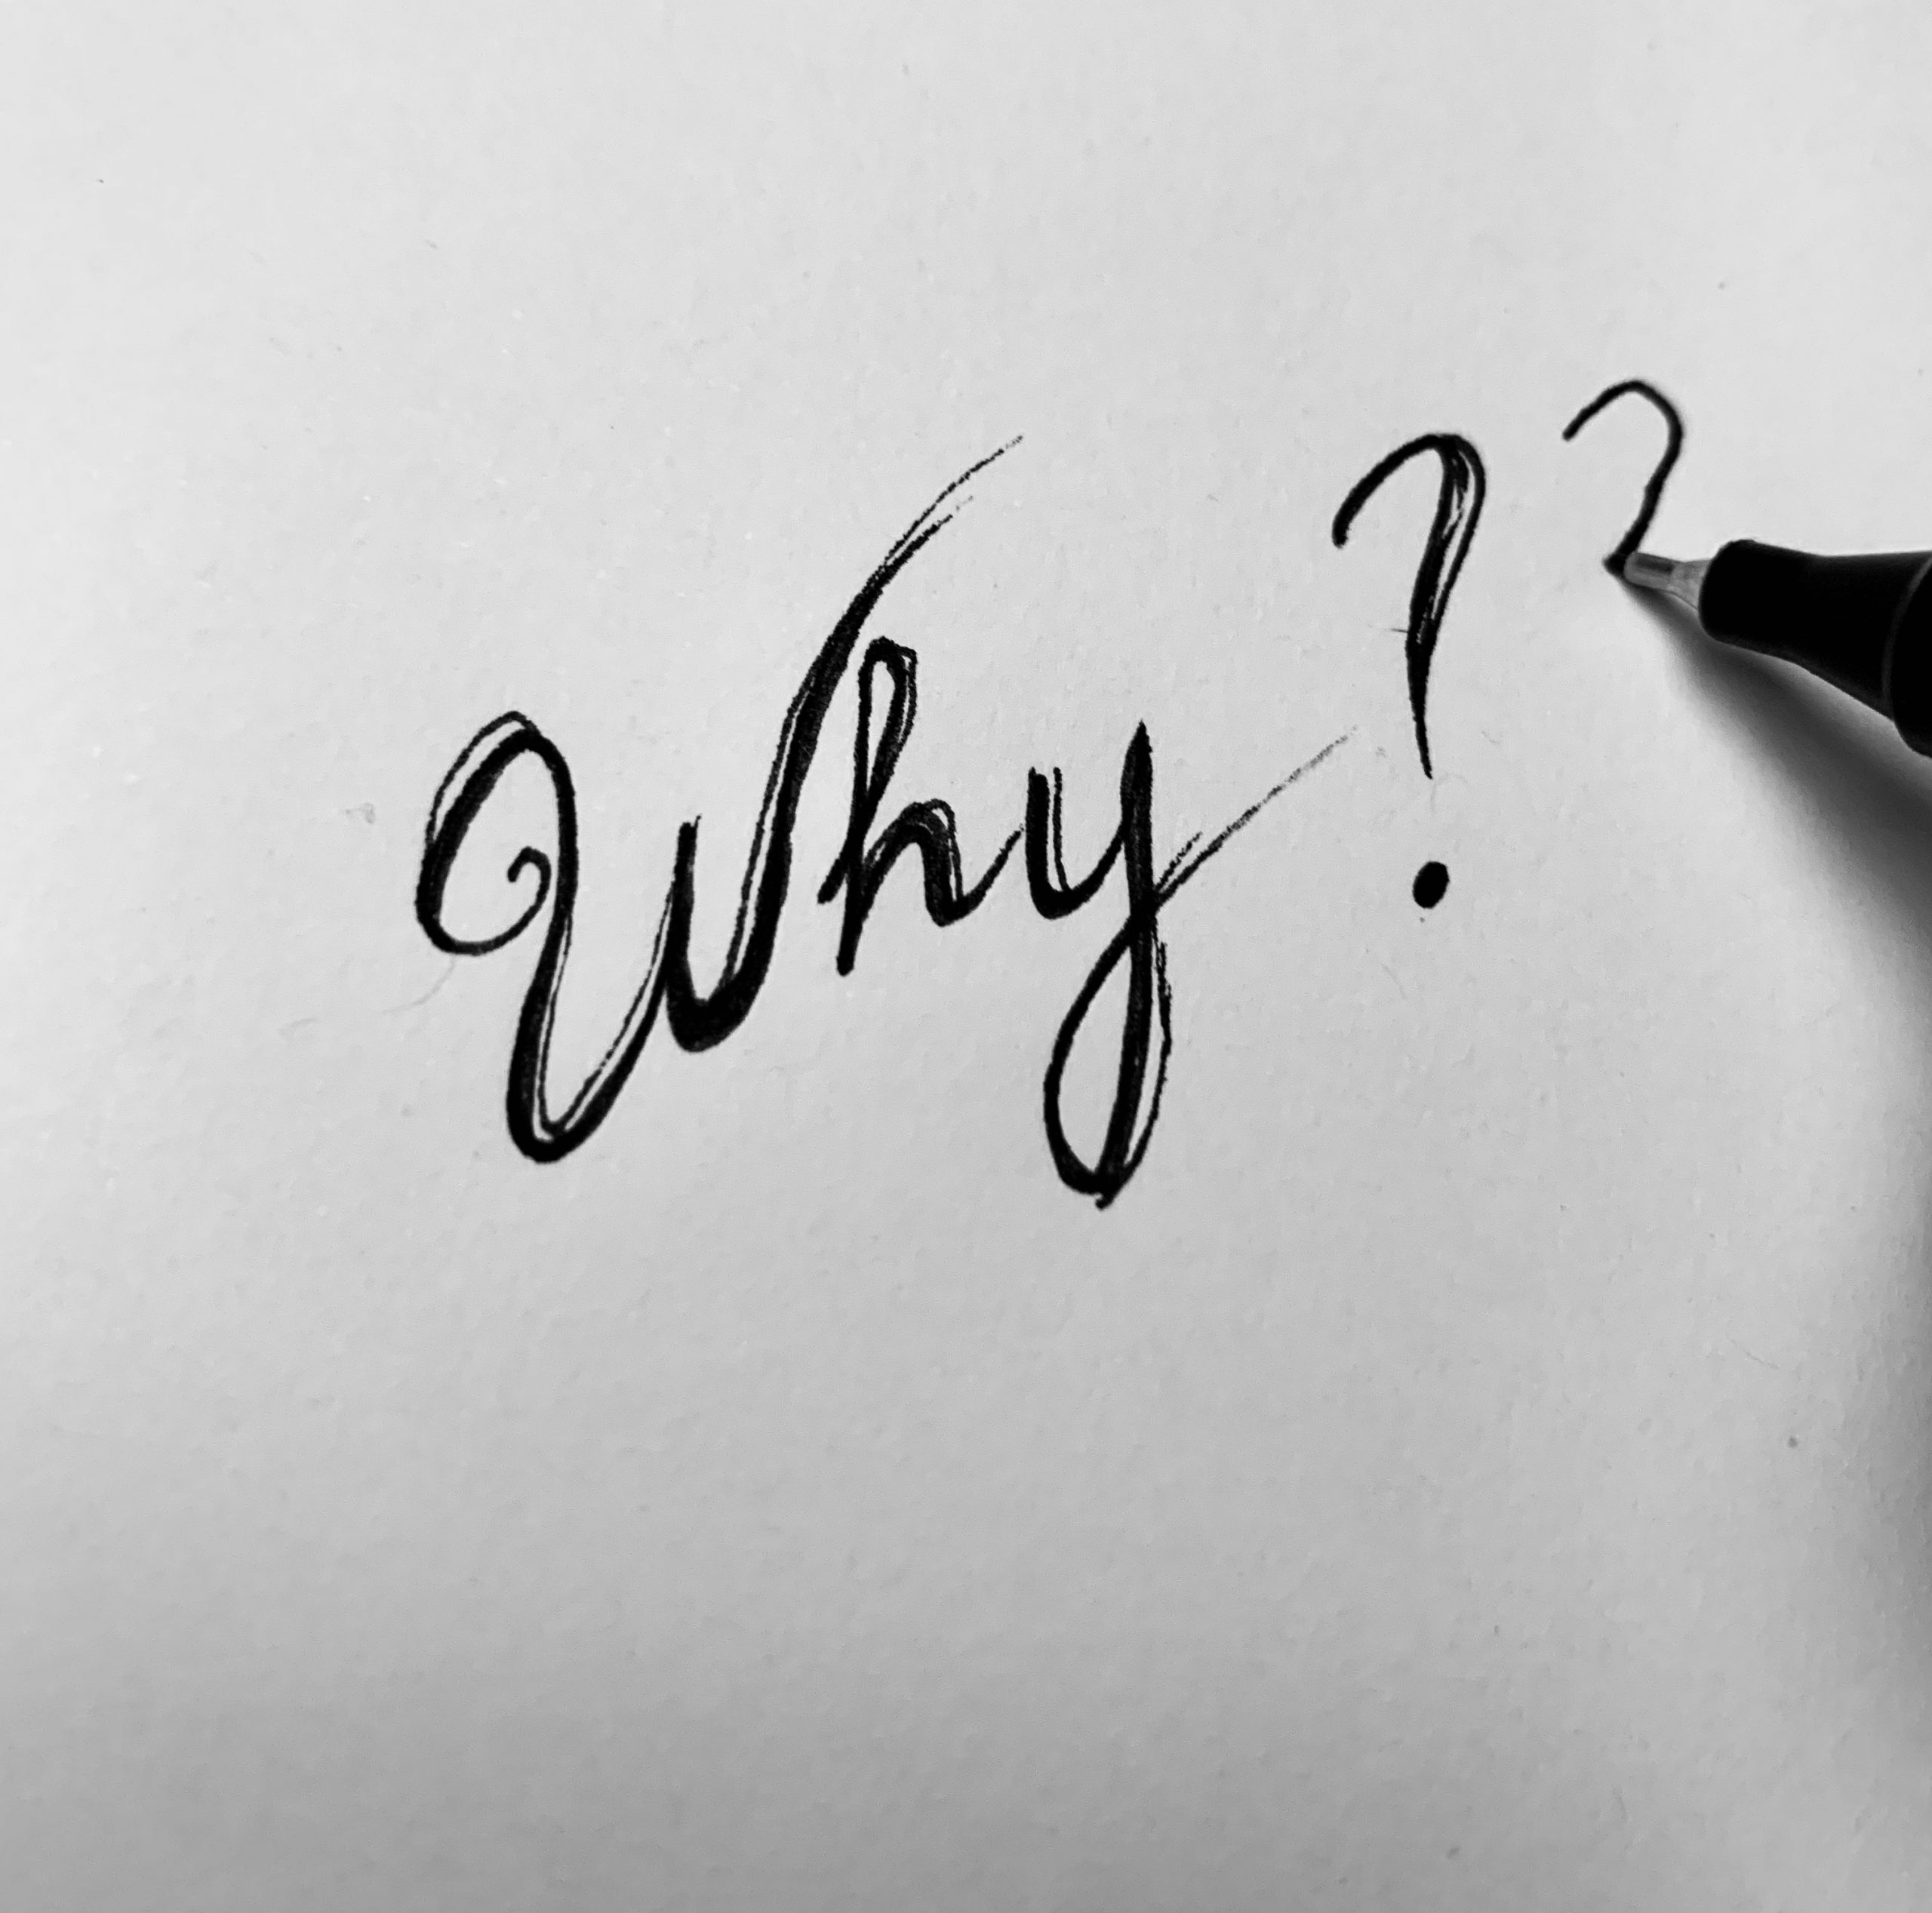 Blank piece of paper with the question "why?" written on it in pen